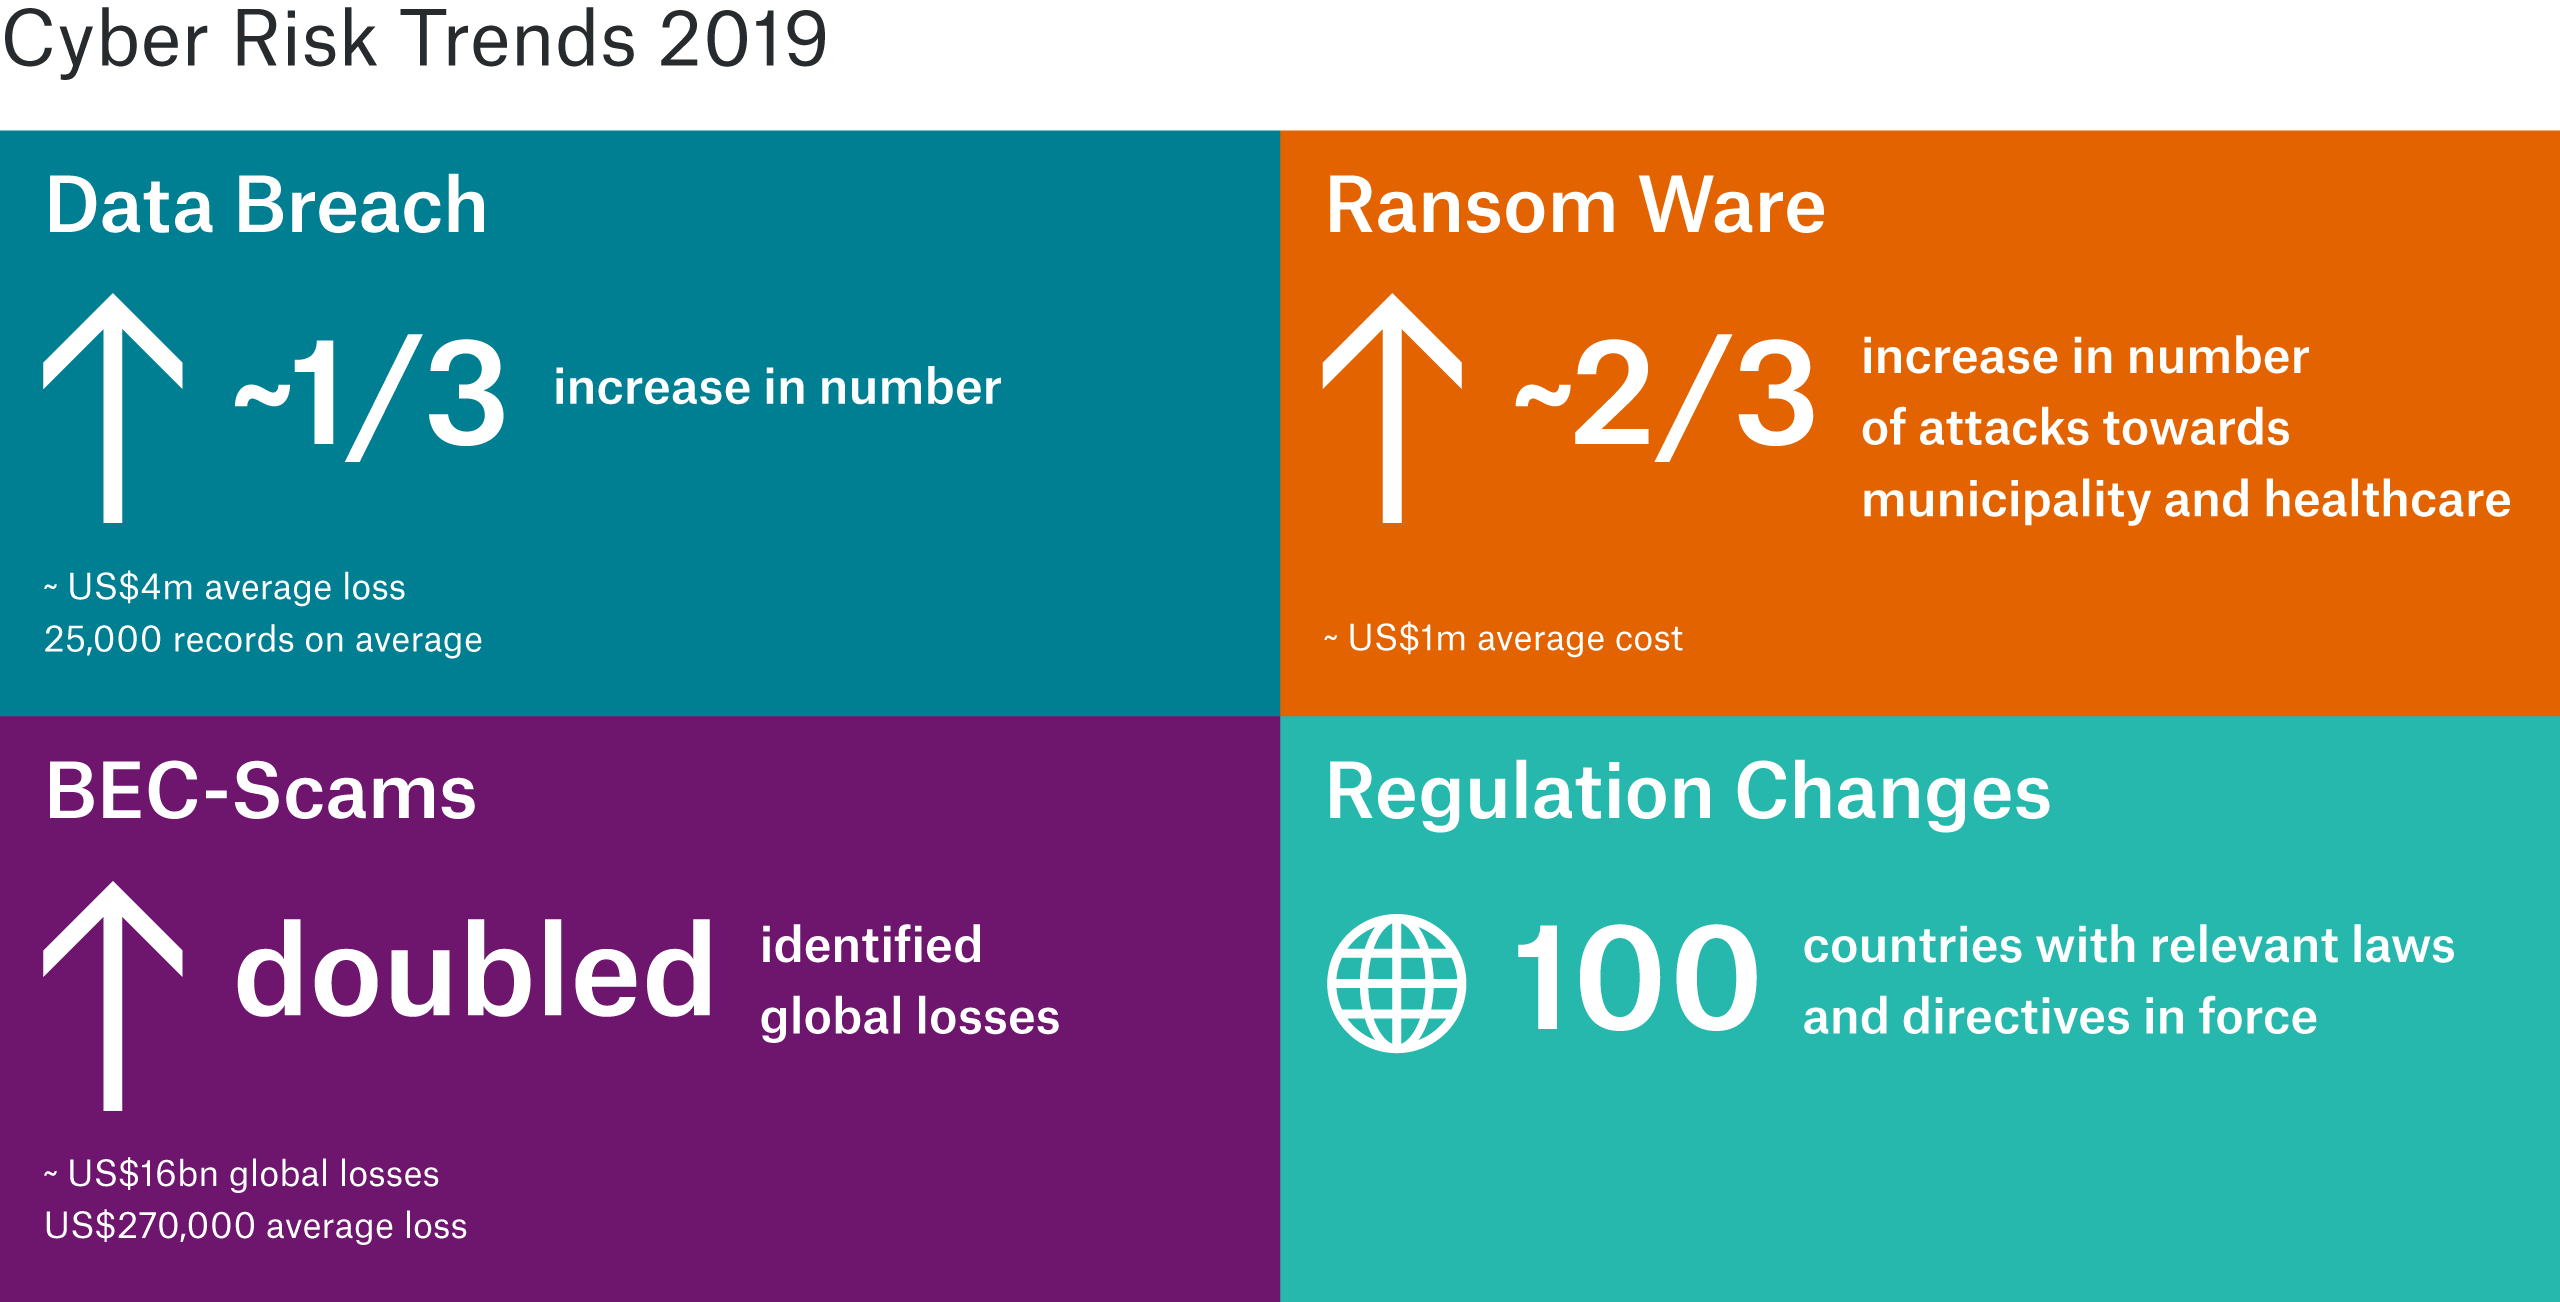 Graph with information on the increase of Data Breach (plus 1/3), Ransomeware (plus 2/3), BEC-Scams (doubled) and regulatory changes (100 countries)